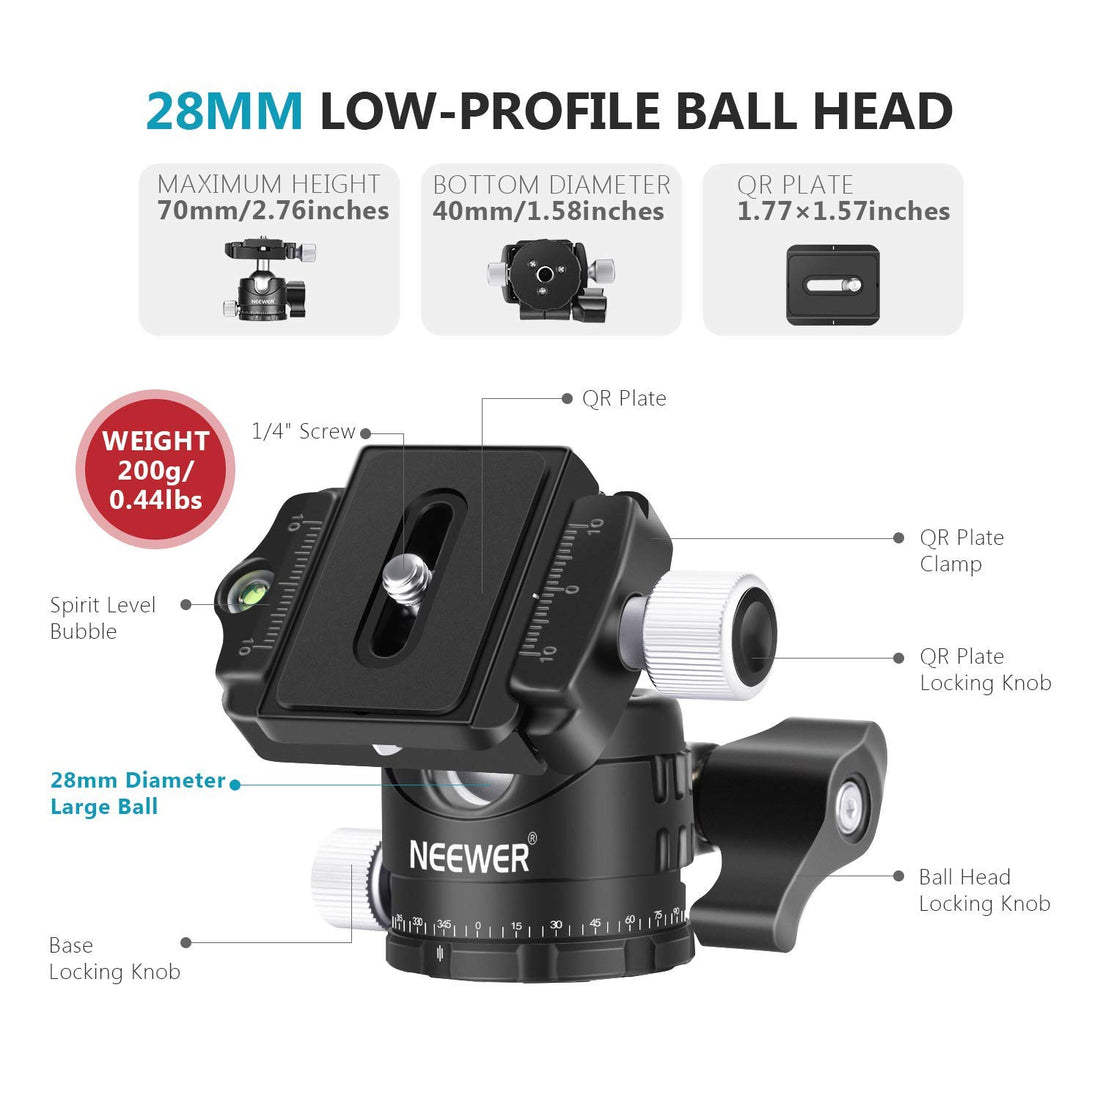 Neewer Professional 28MM Low-Profile Tripod Ball Head 360 Degree Panoramic Rotating with 2 Lock knobs, 1/4 inch QR Plate and Bubble Level for DSLR Cameras Tripods Monopods Slider, Max Load 22lbs/10kg